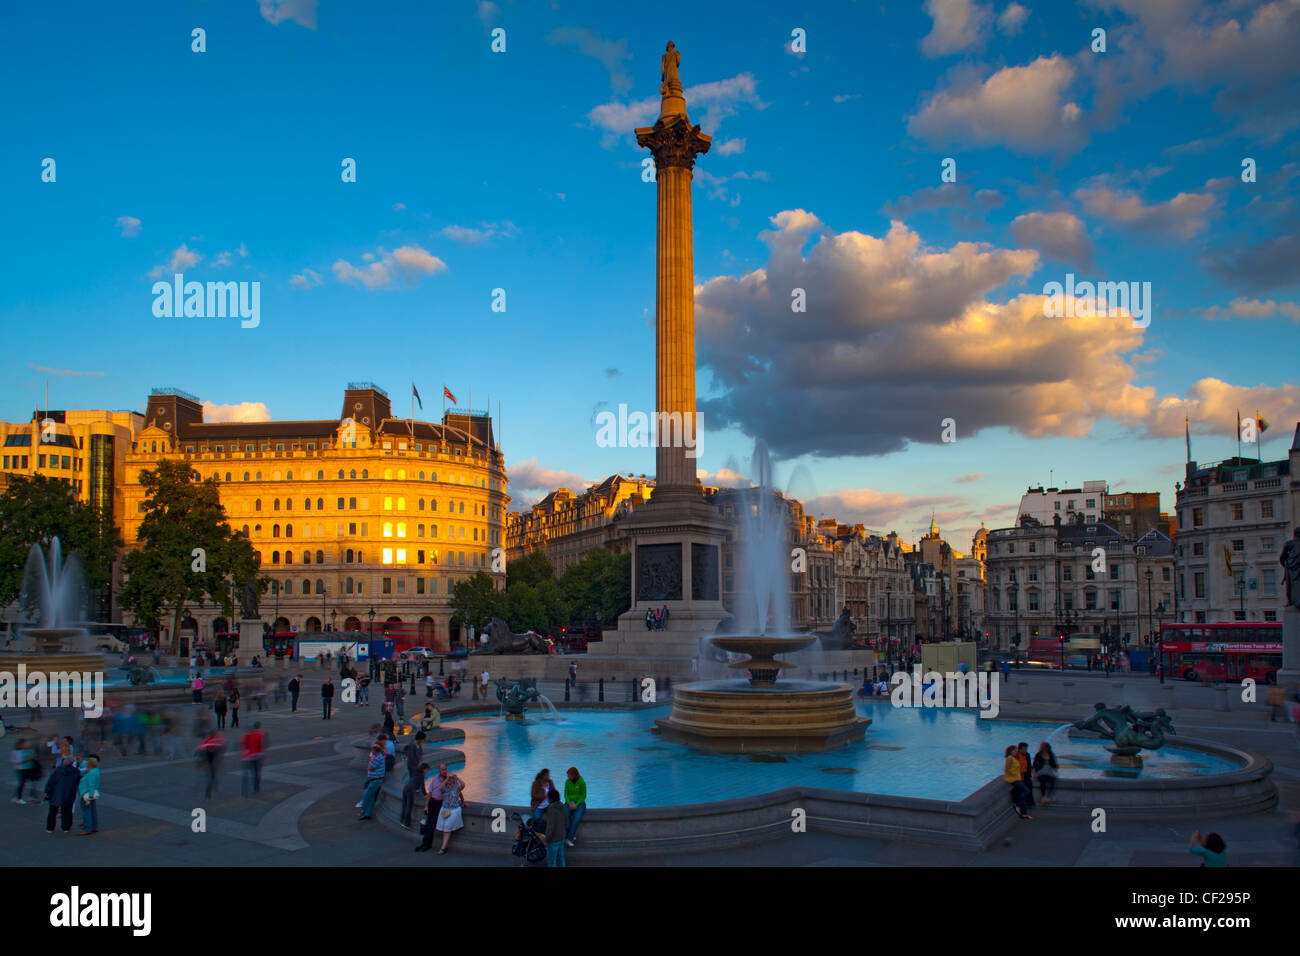 Nelson's Column and fountains in Trafalgar Square, one of London's most popular tourist destinations. Stock Photo